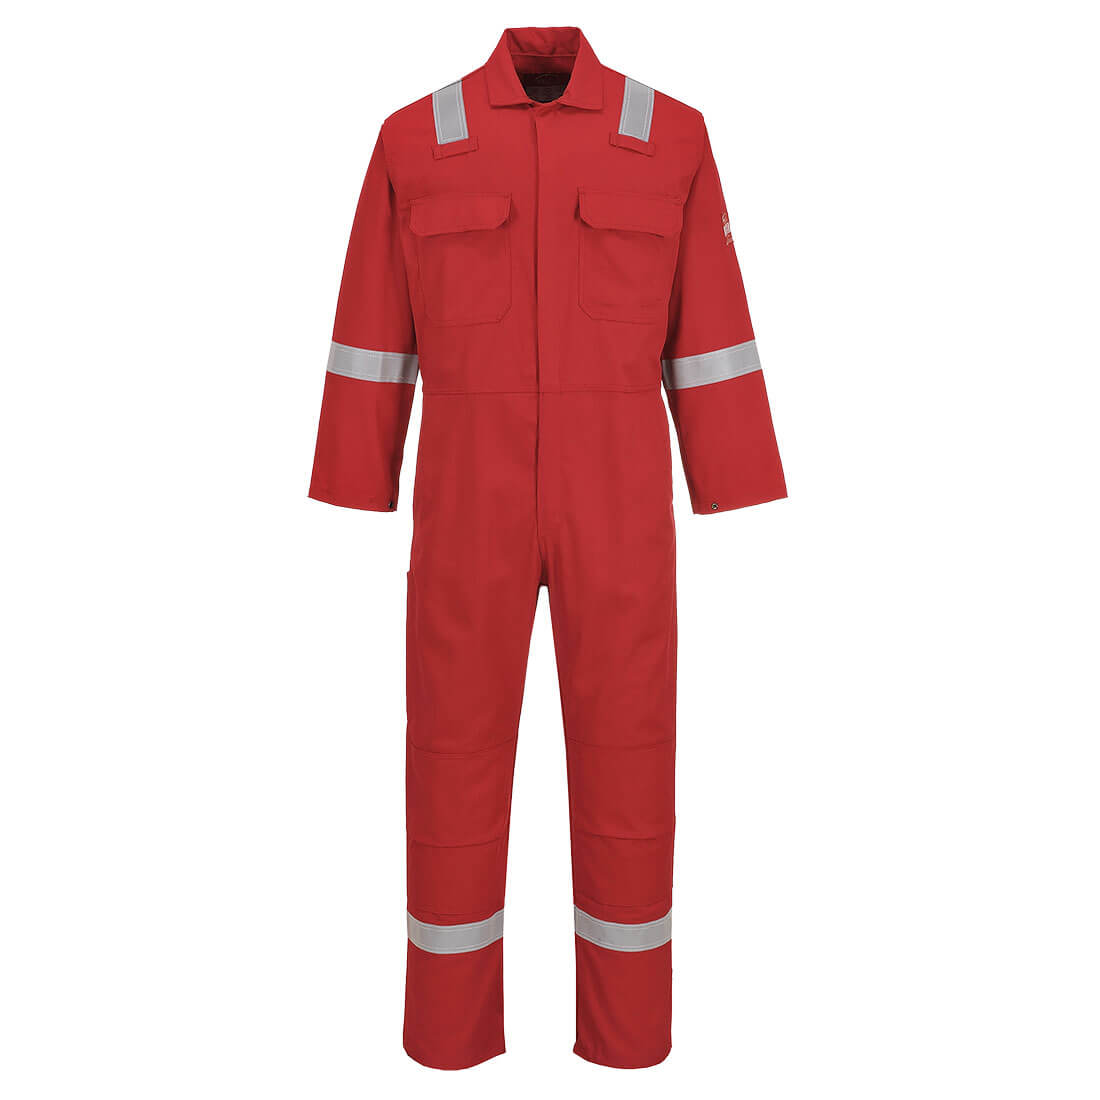 Bizweld Classic Coverall BZ506 Red Size 4XL Fit R